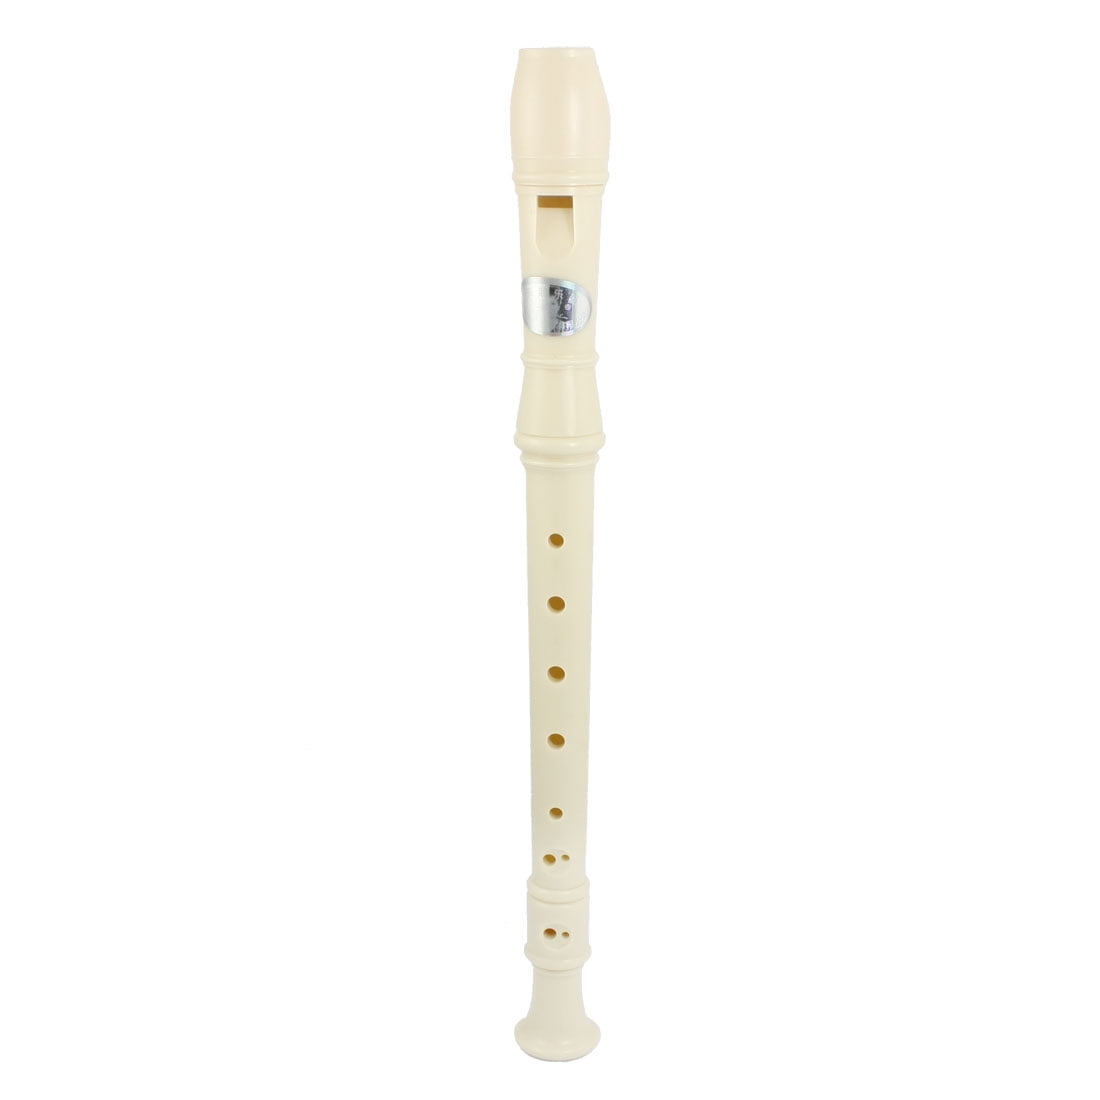 Soprano Descant Recorder 8 Blue Vangoa Hole with Cleaning Rod